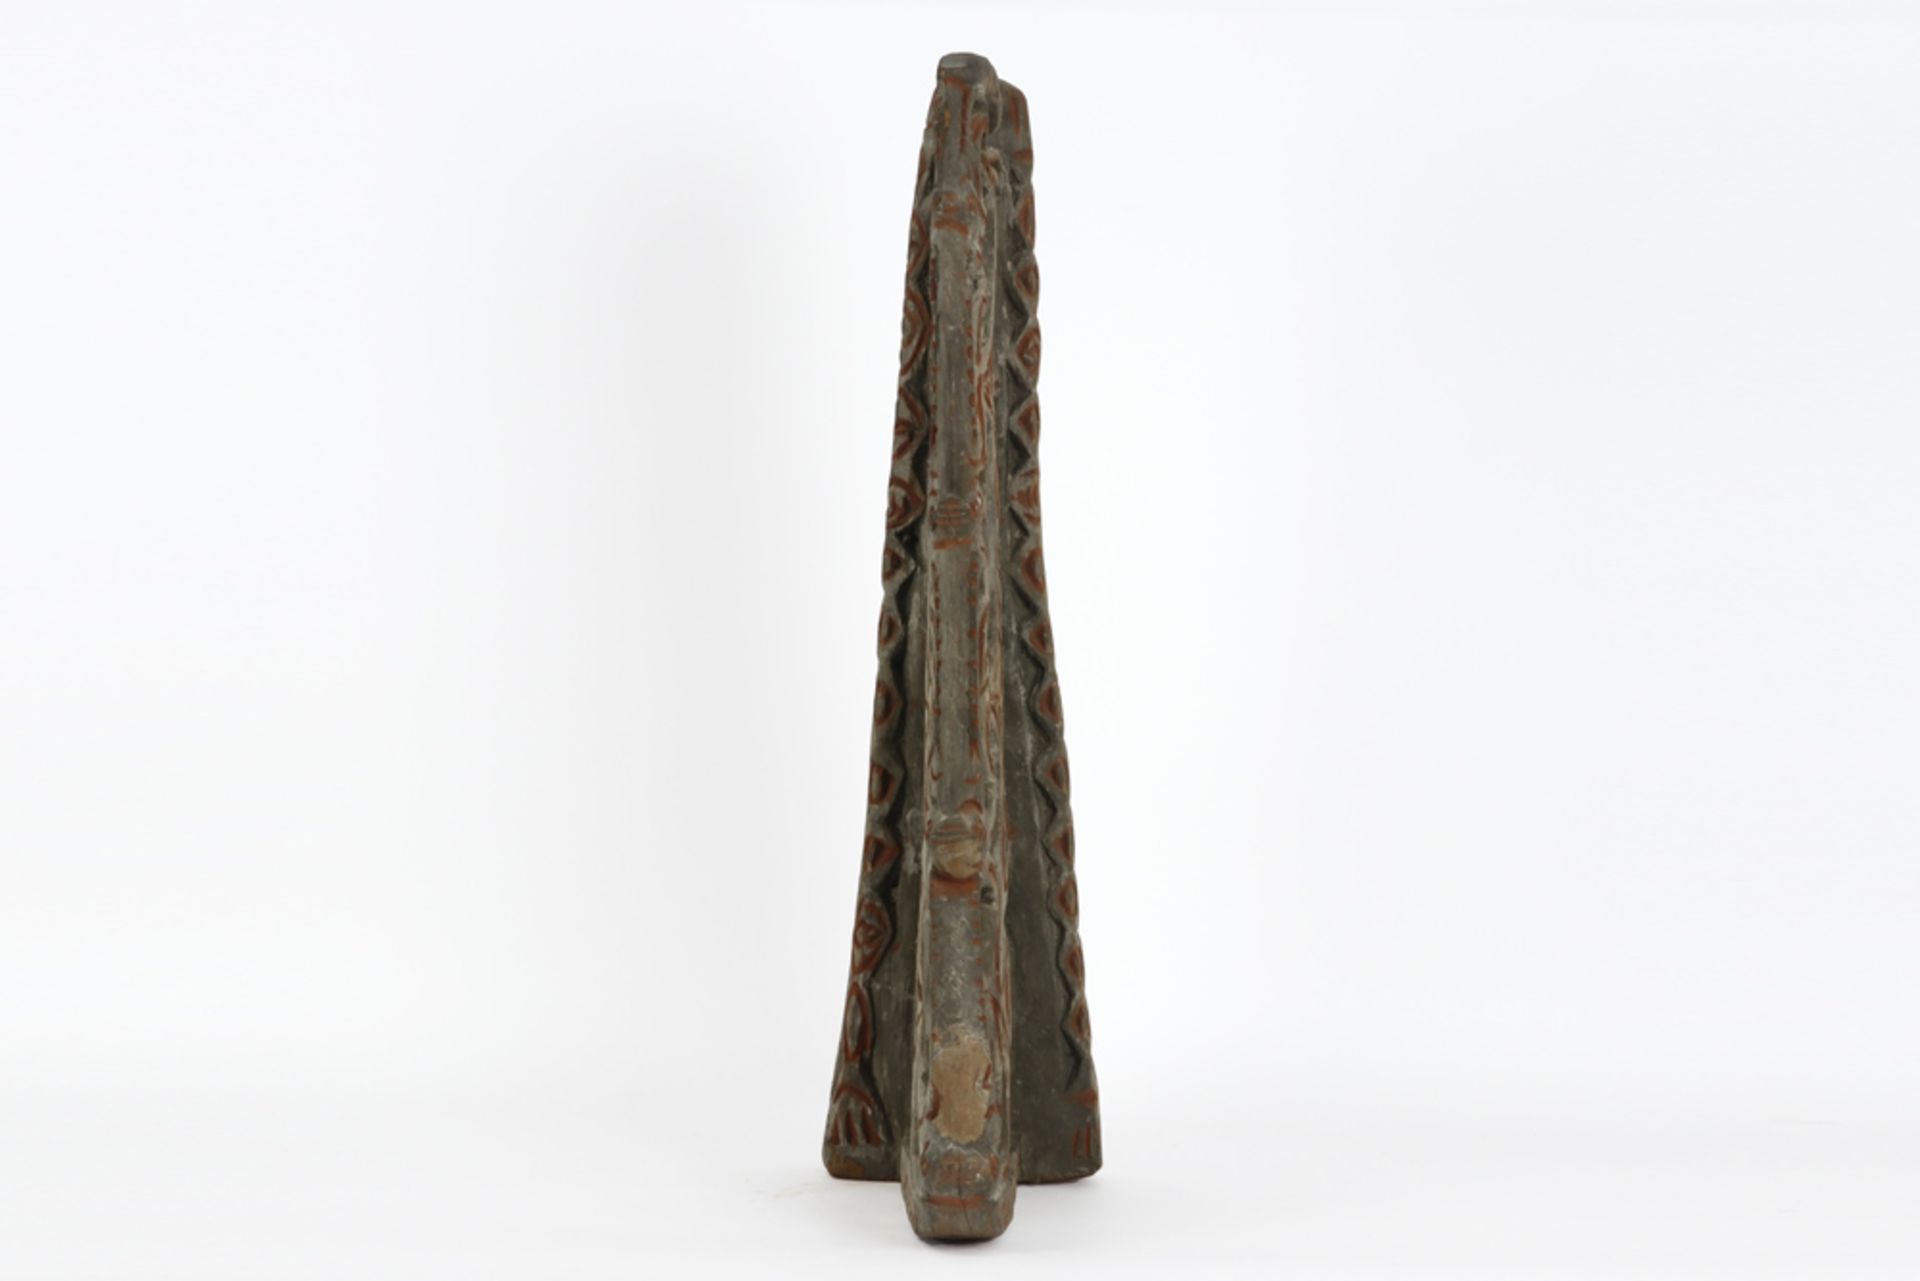 Irian Jaya Central Asmat canoe prow in typically carved wood || INDONESIE / IRIAN JAYA - CENTRAL - Image 3 of 3